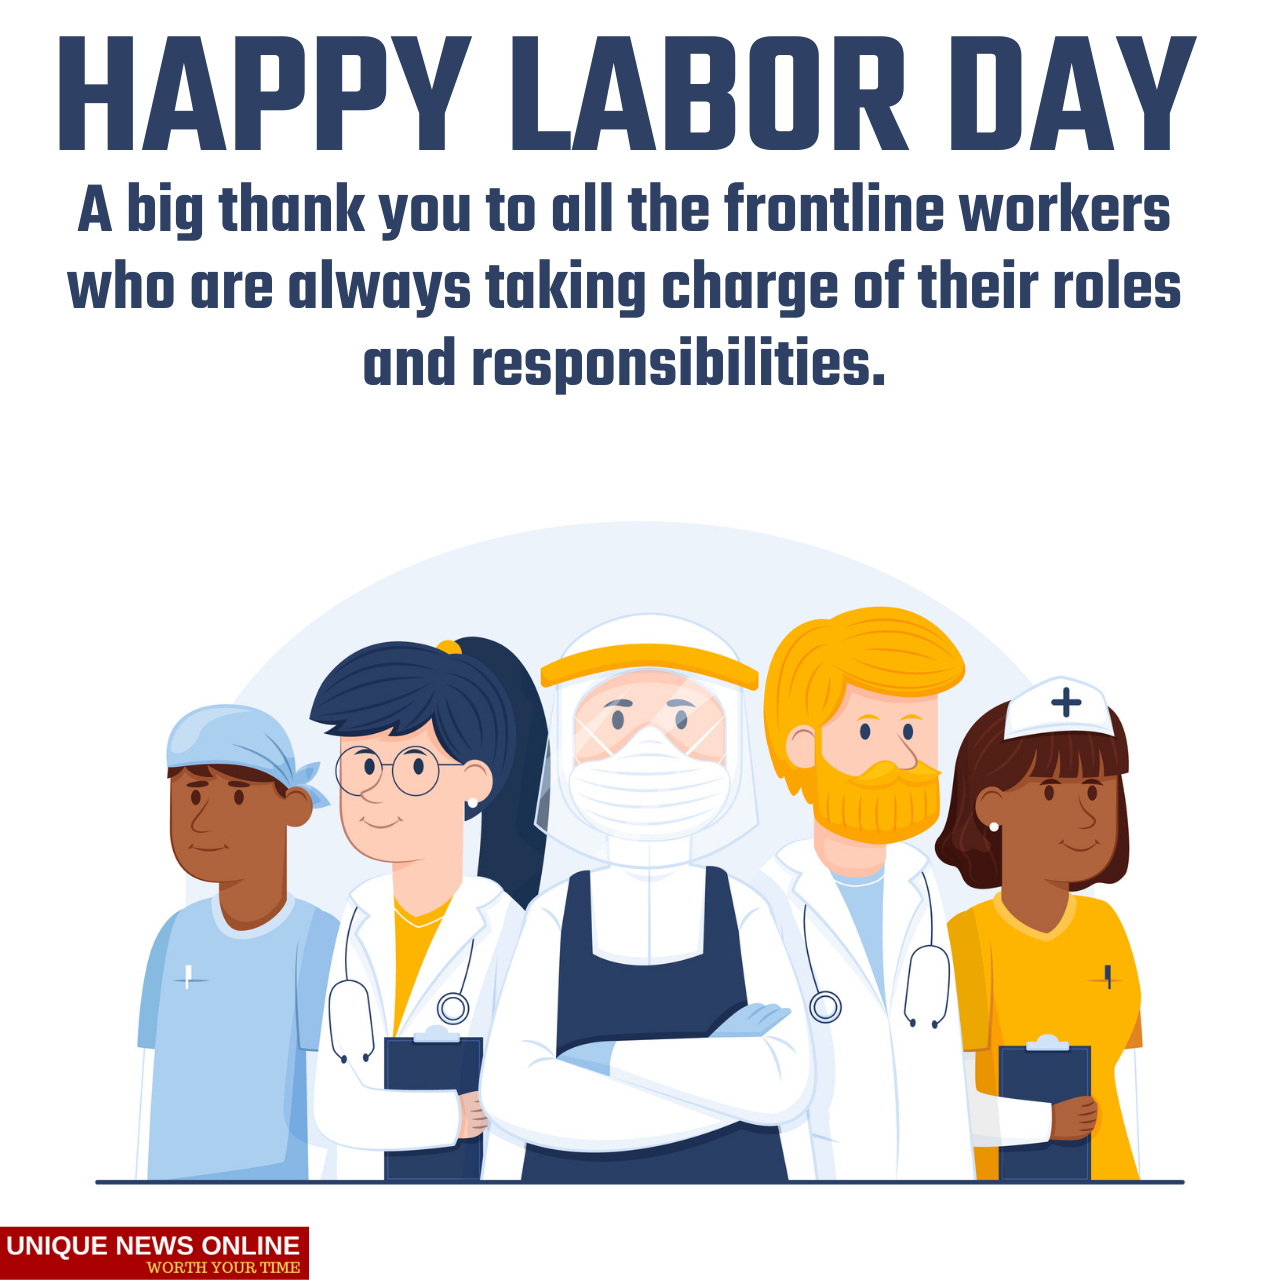 Happy Labor Day 2021 Quotes Images Wishes Greetings Instagram Captions And Stickers For